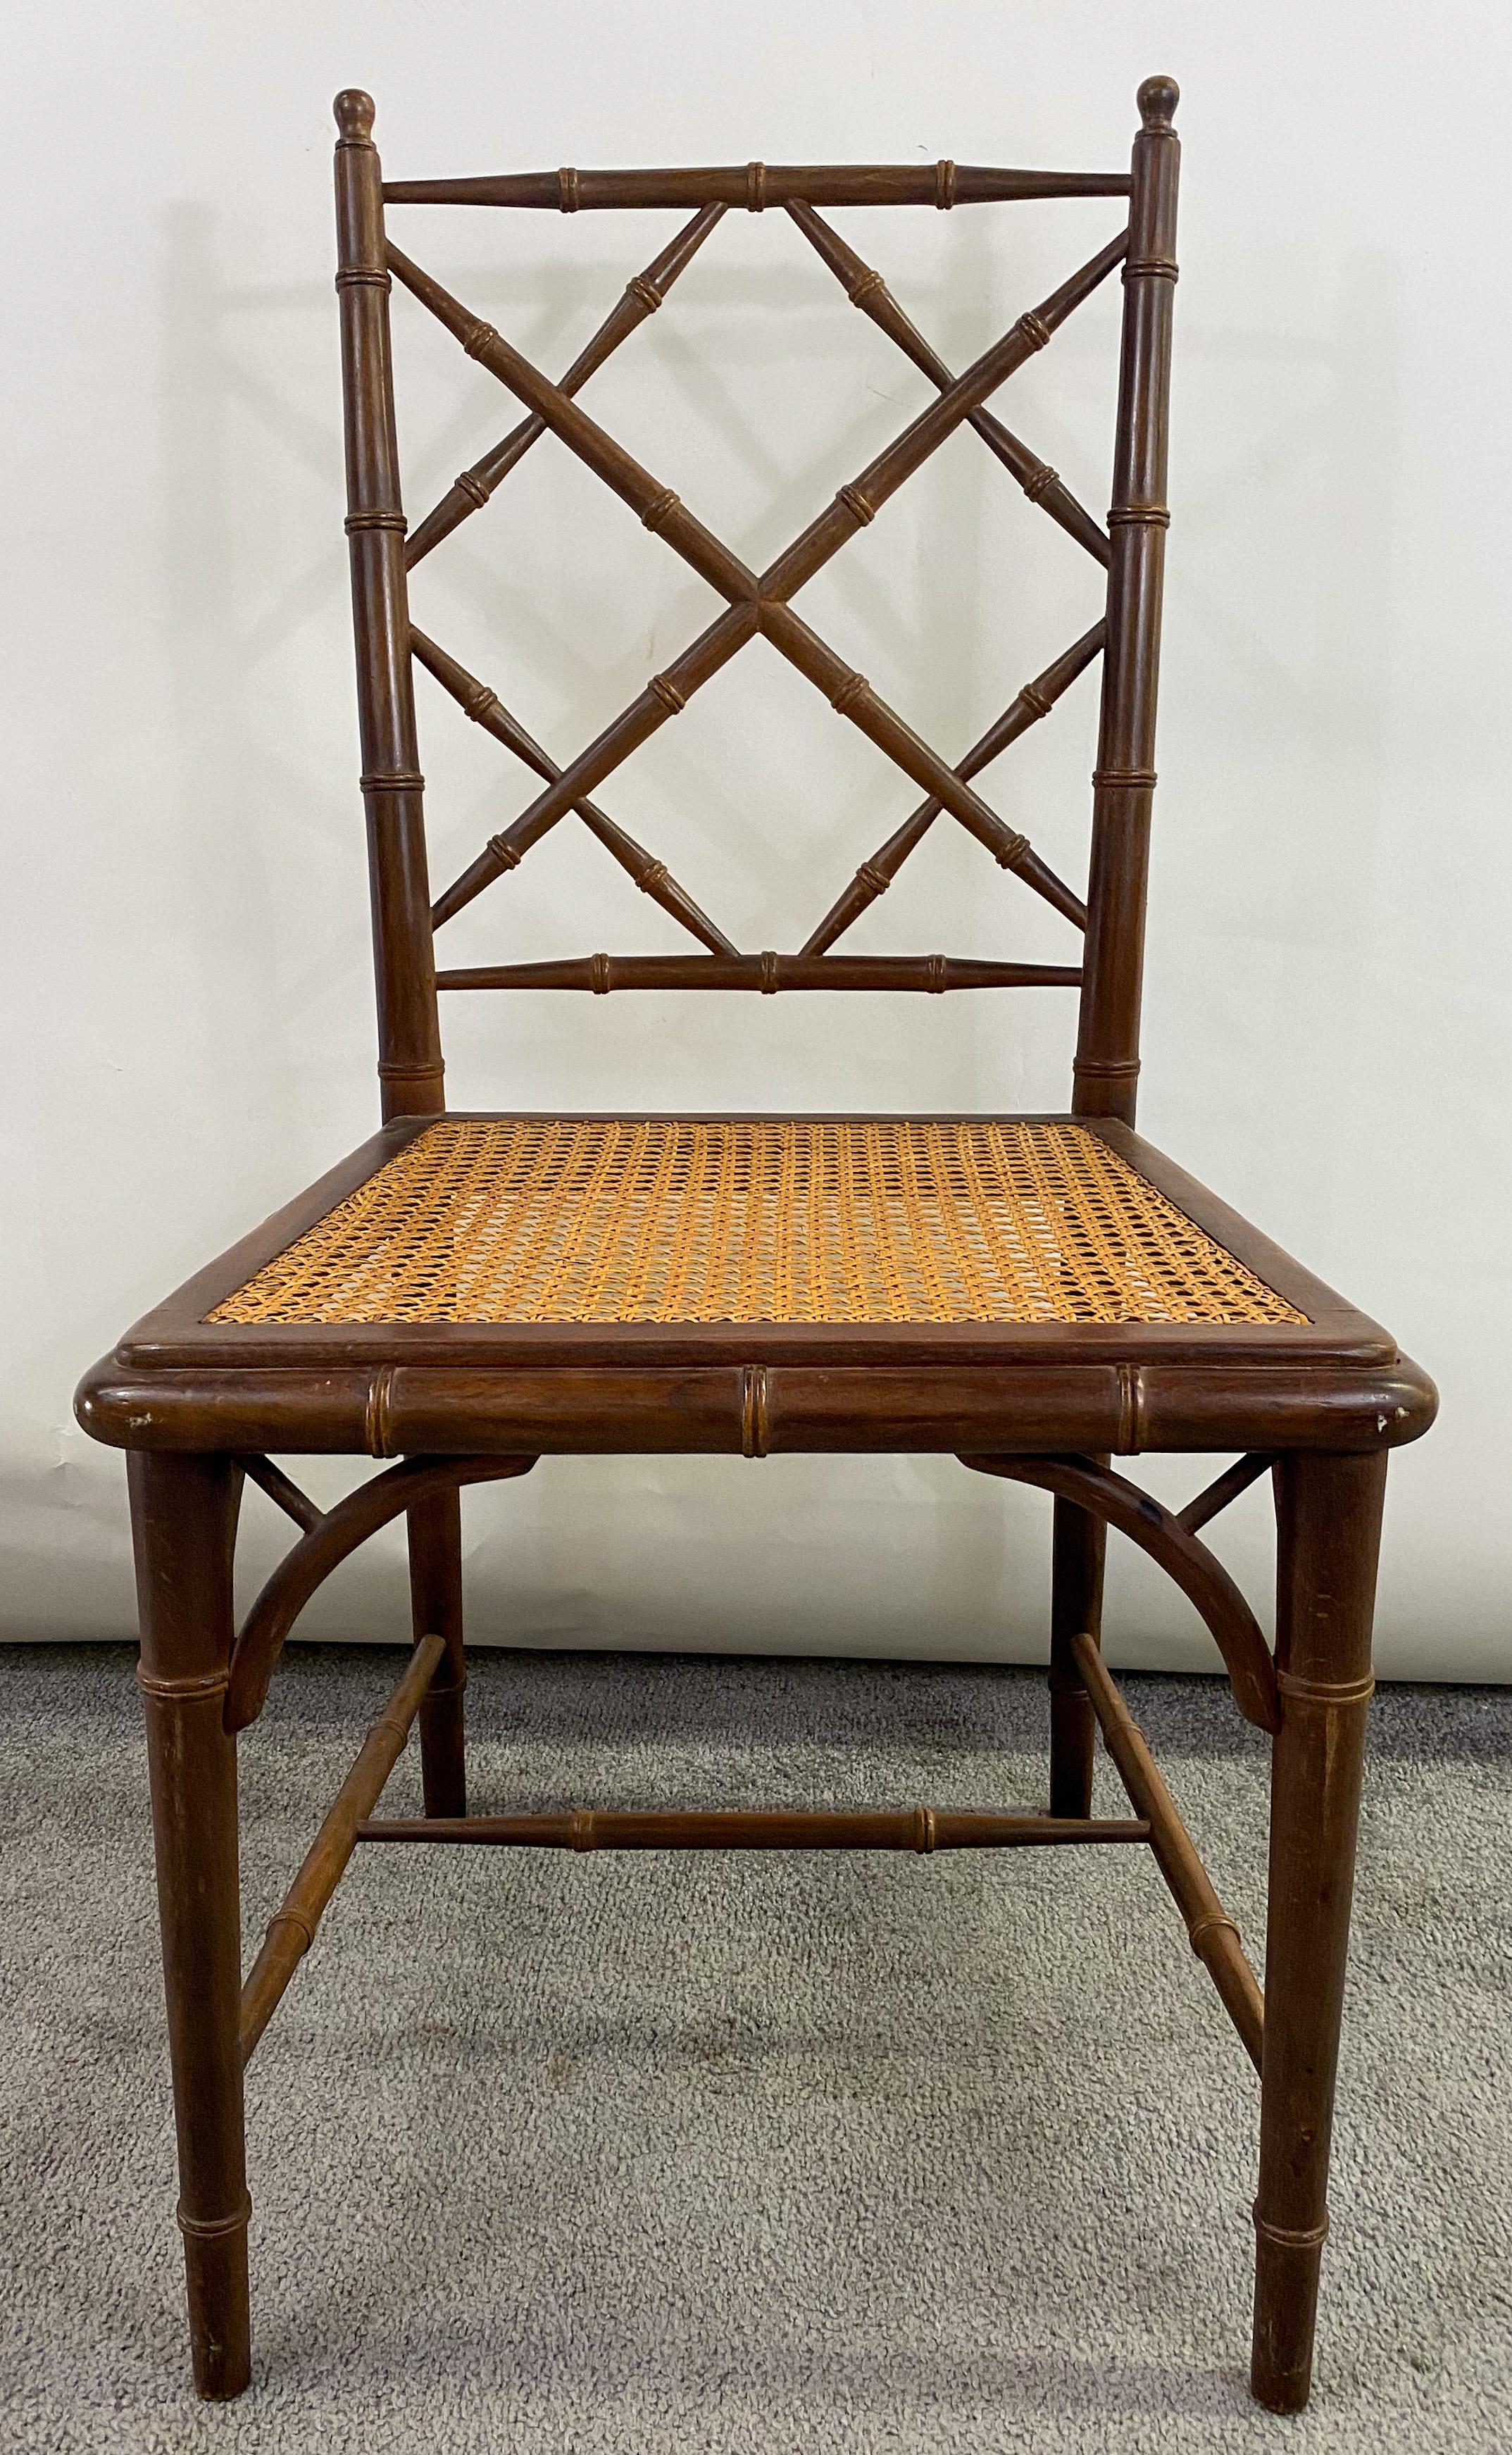 An elegant Mid-Century French Art Nouveau style desk of side chair made in faux Bamboo design . The back of the chair features beautiful diamonds design and the seat is made of wicker. The chair will look great in a working space or as a side or